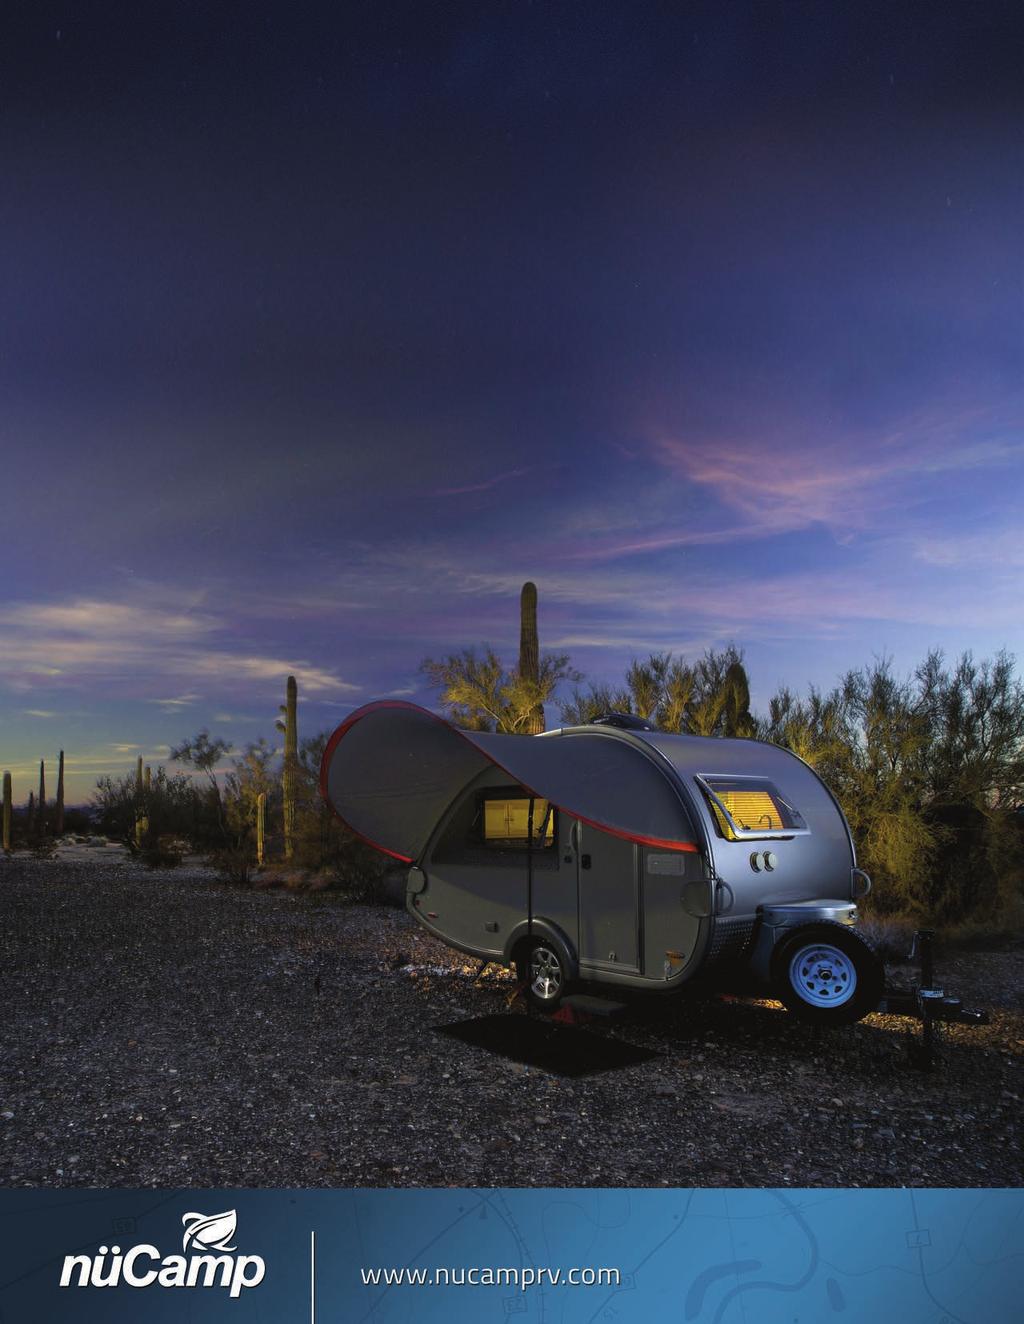 nucamp RV manufactures the highest quality recreational vehicles and truck campers available in North America.